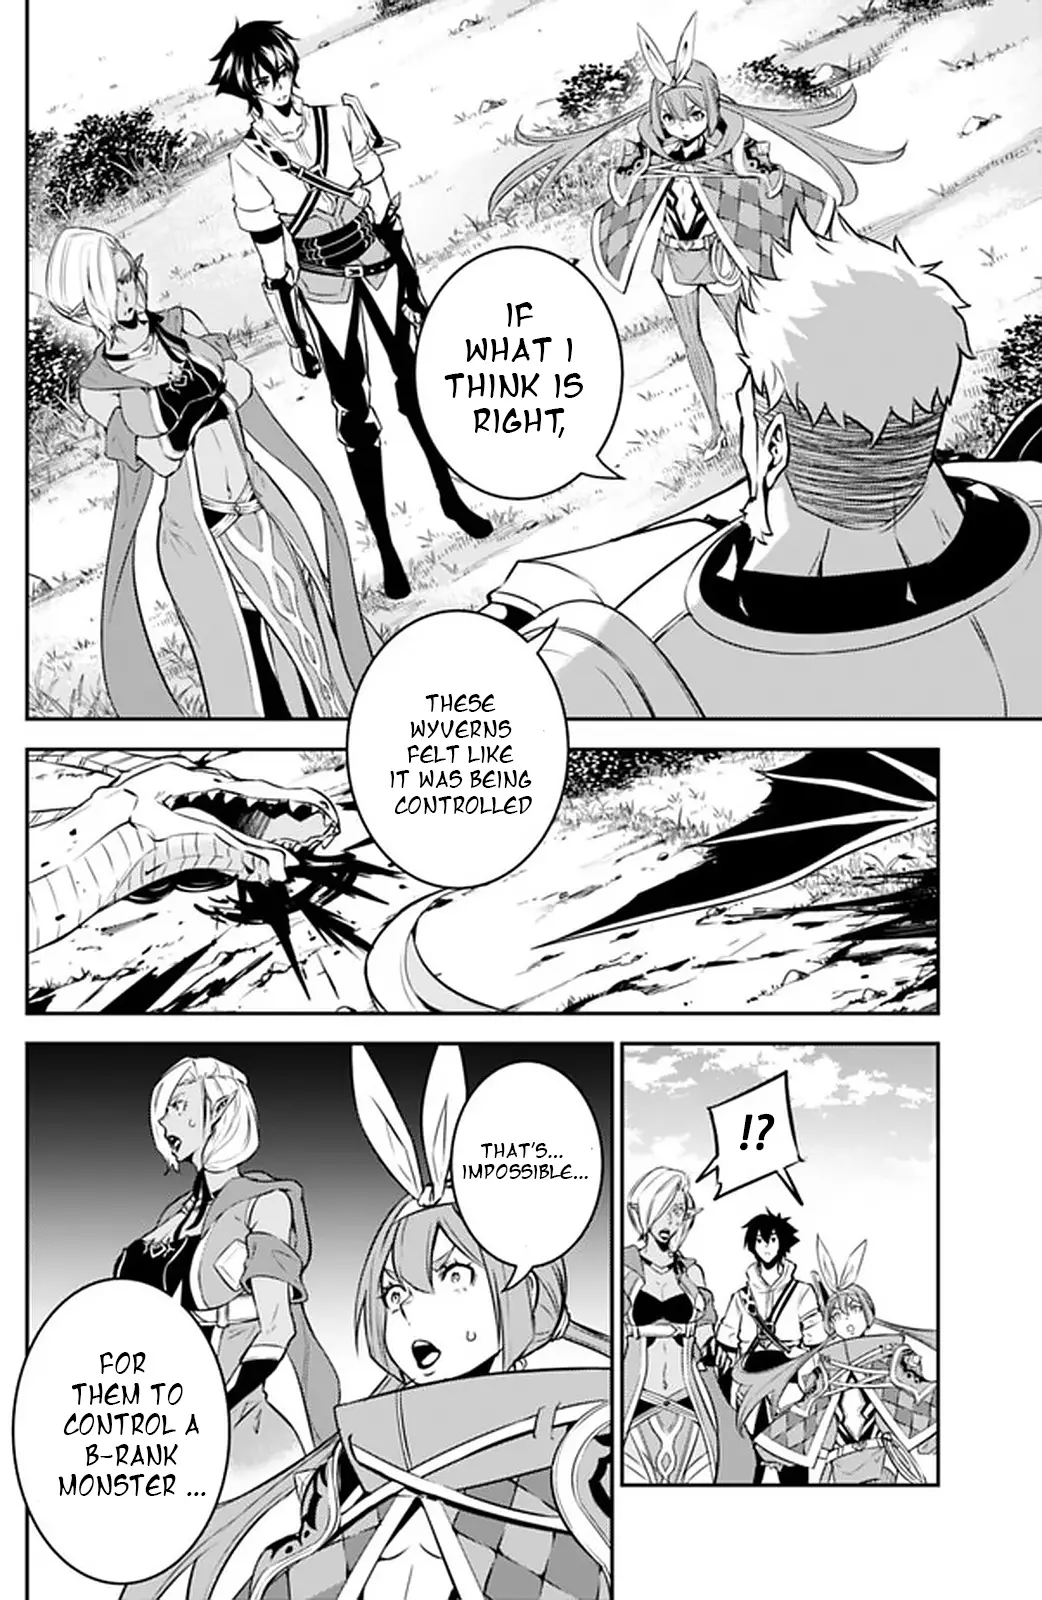 The Strongest Magical Swordsman Ever Reborn As An F-Rank Adventurer. - 33 page 6